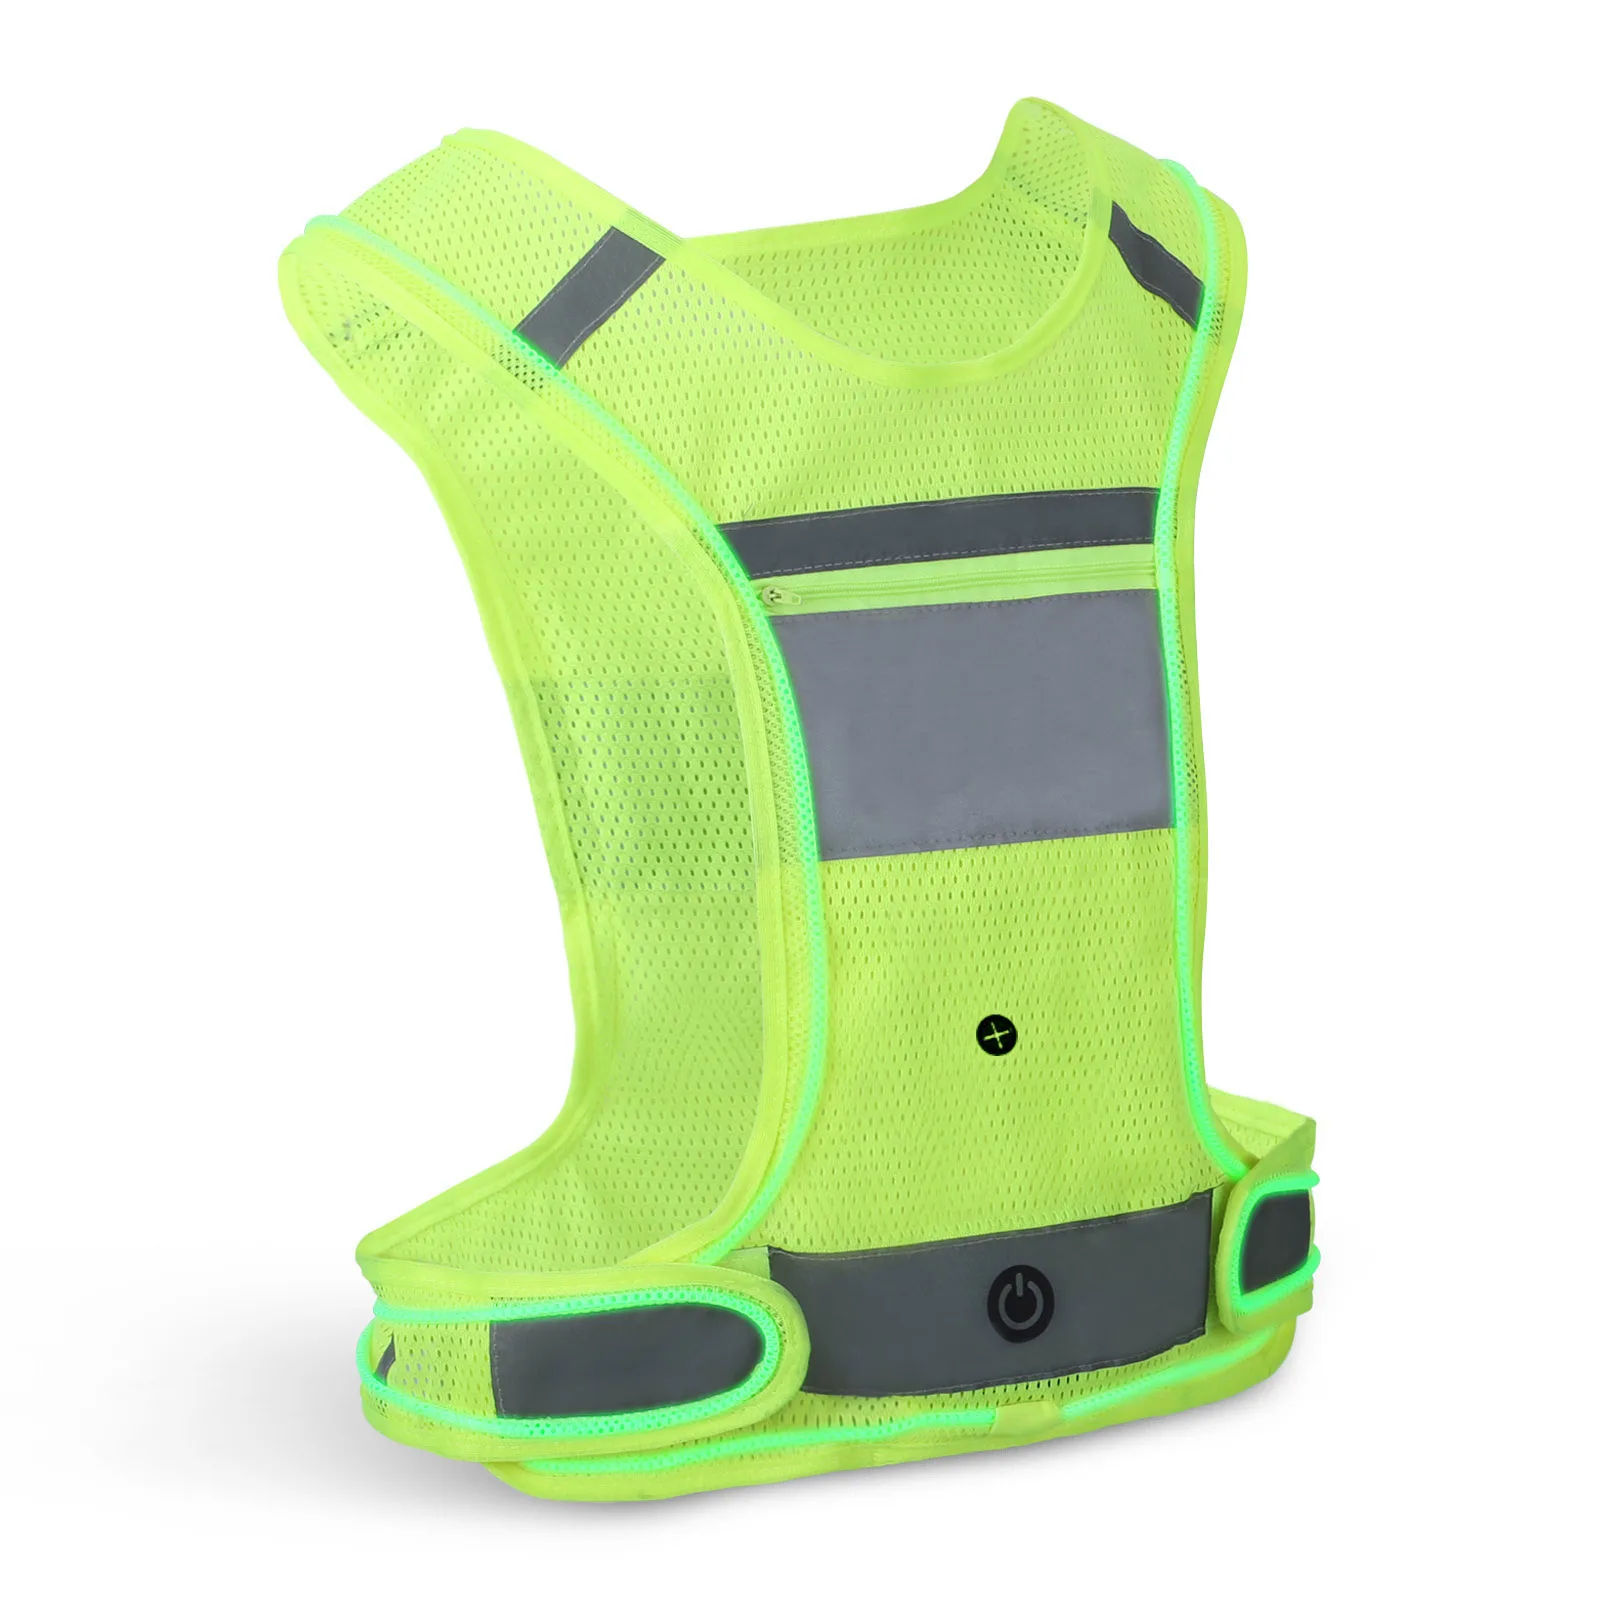 Large Pocket with Adjustable Waist Cycling Be Visible Stay Safe Ultralight & Comfy Walking Safety Vest in 6 Sizes for Running Reflective Vest Running Gear Included 2 Reflective Bands & Bag 